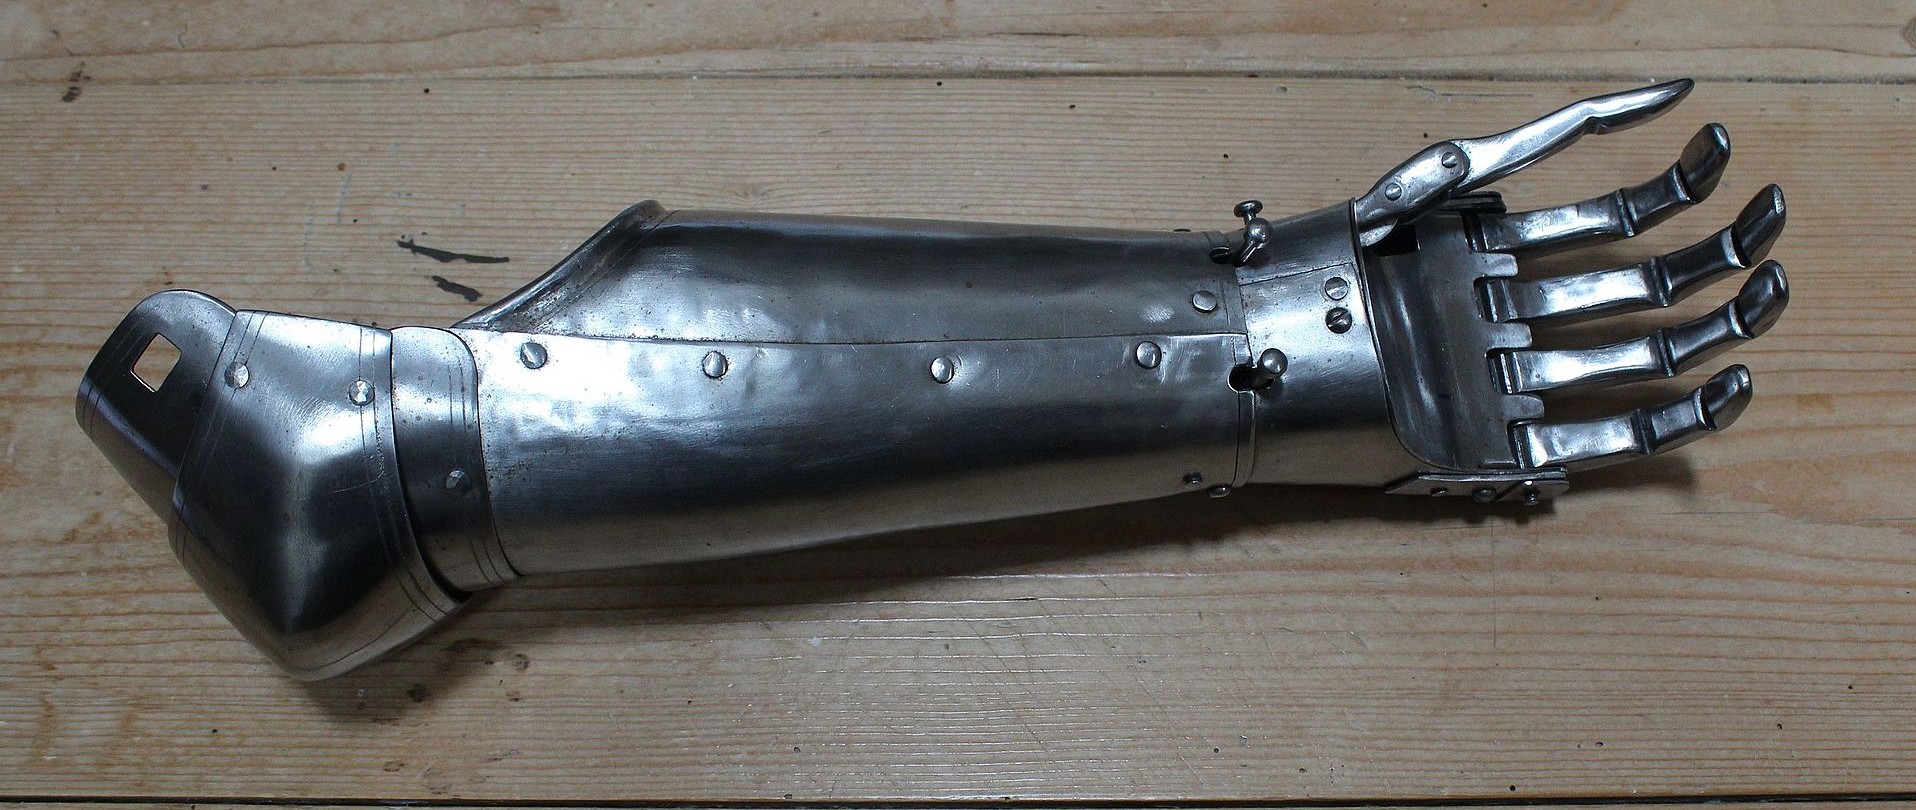 Photo of an antique metal prosthetic arm